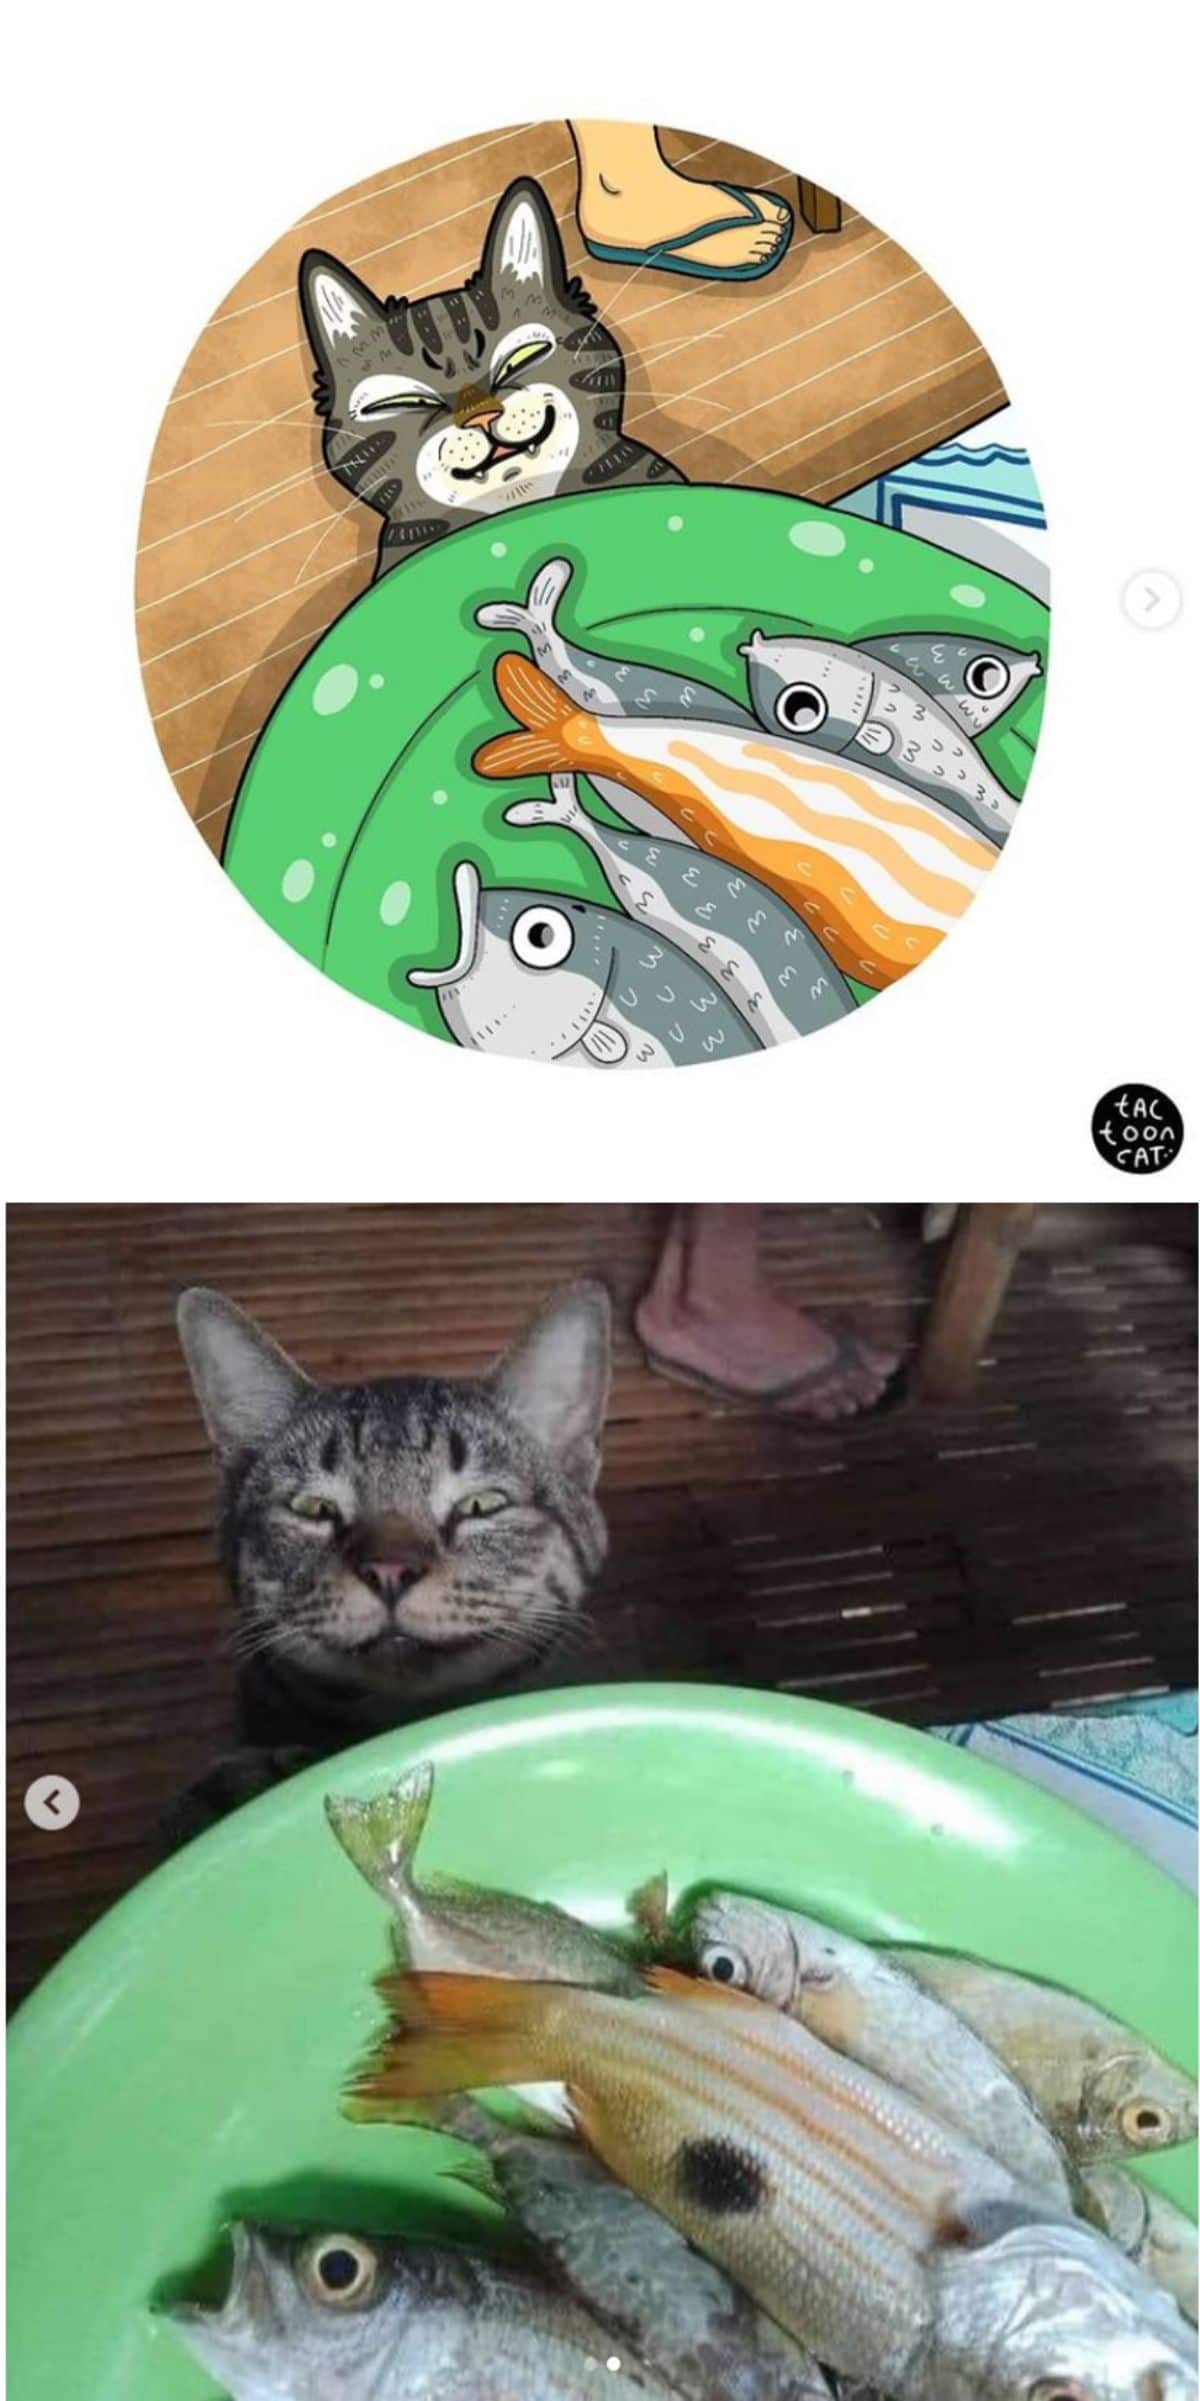 cartoon photo and real photo of a grey tabby cat sitting under a green plate filled with fish